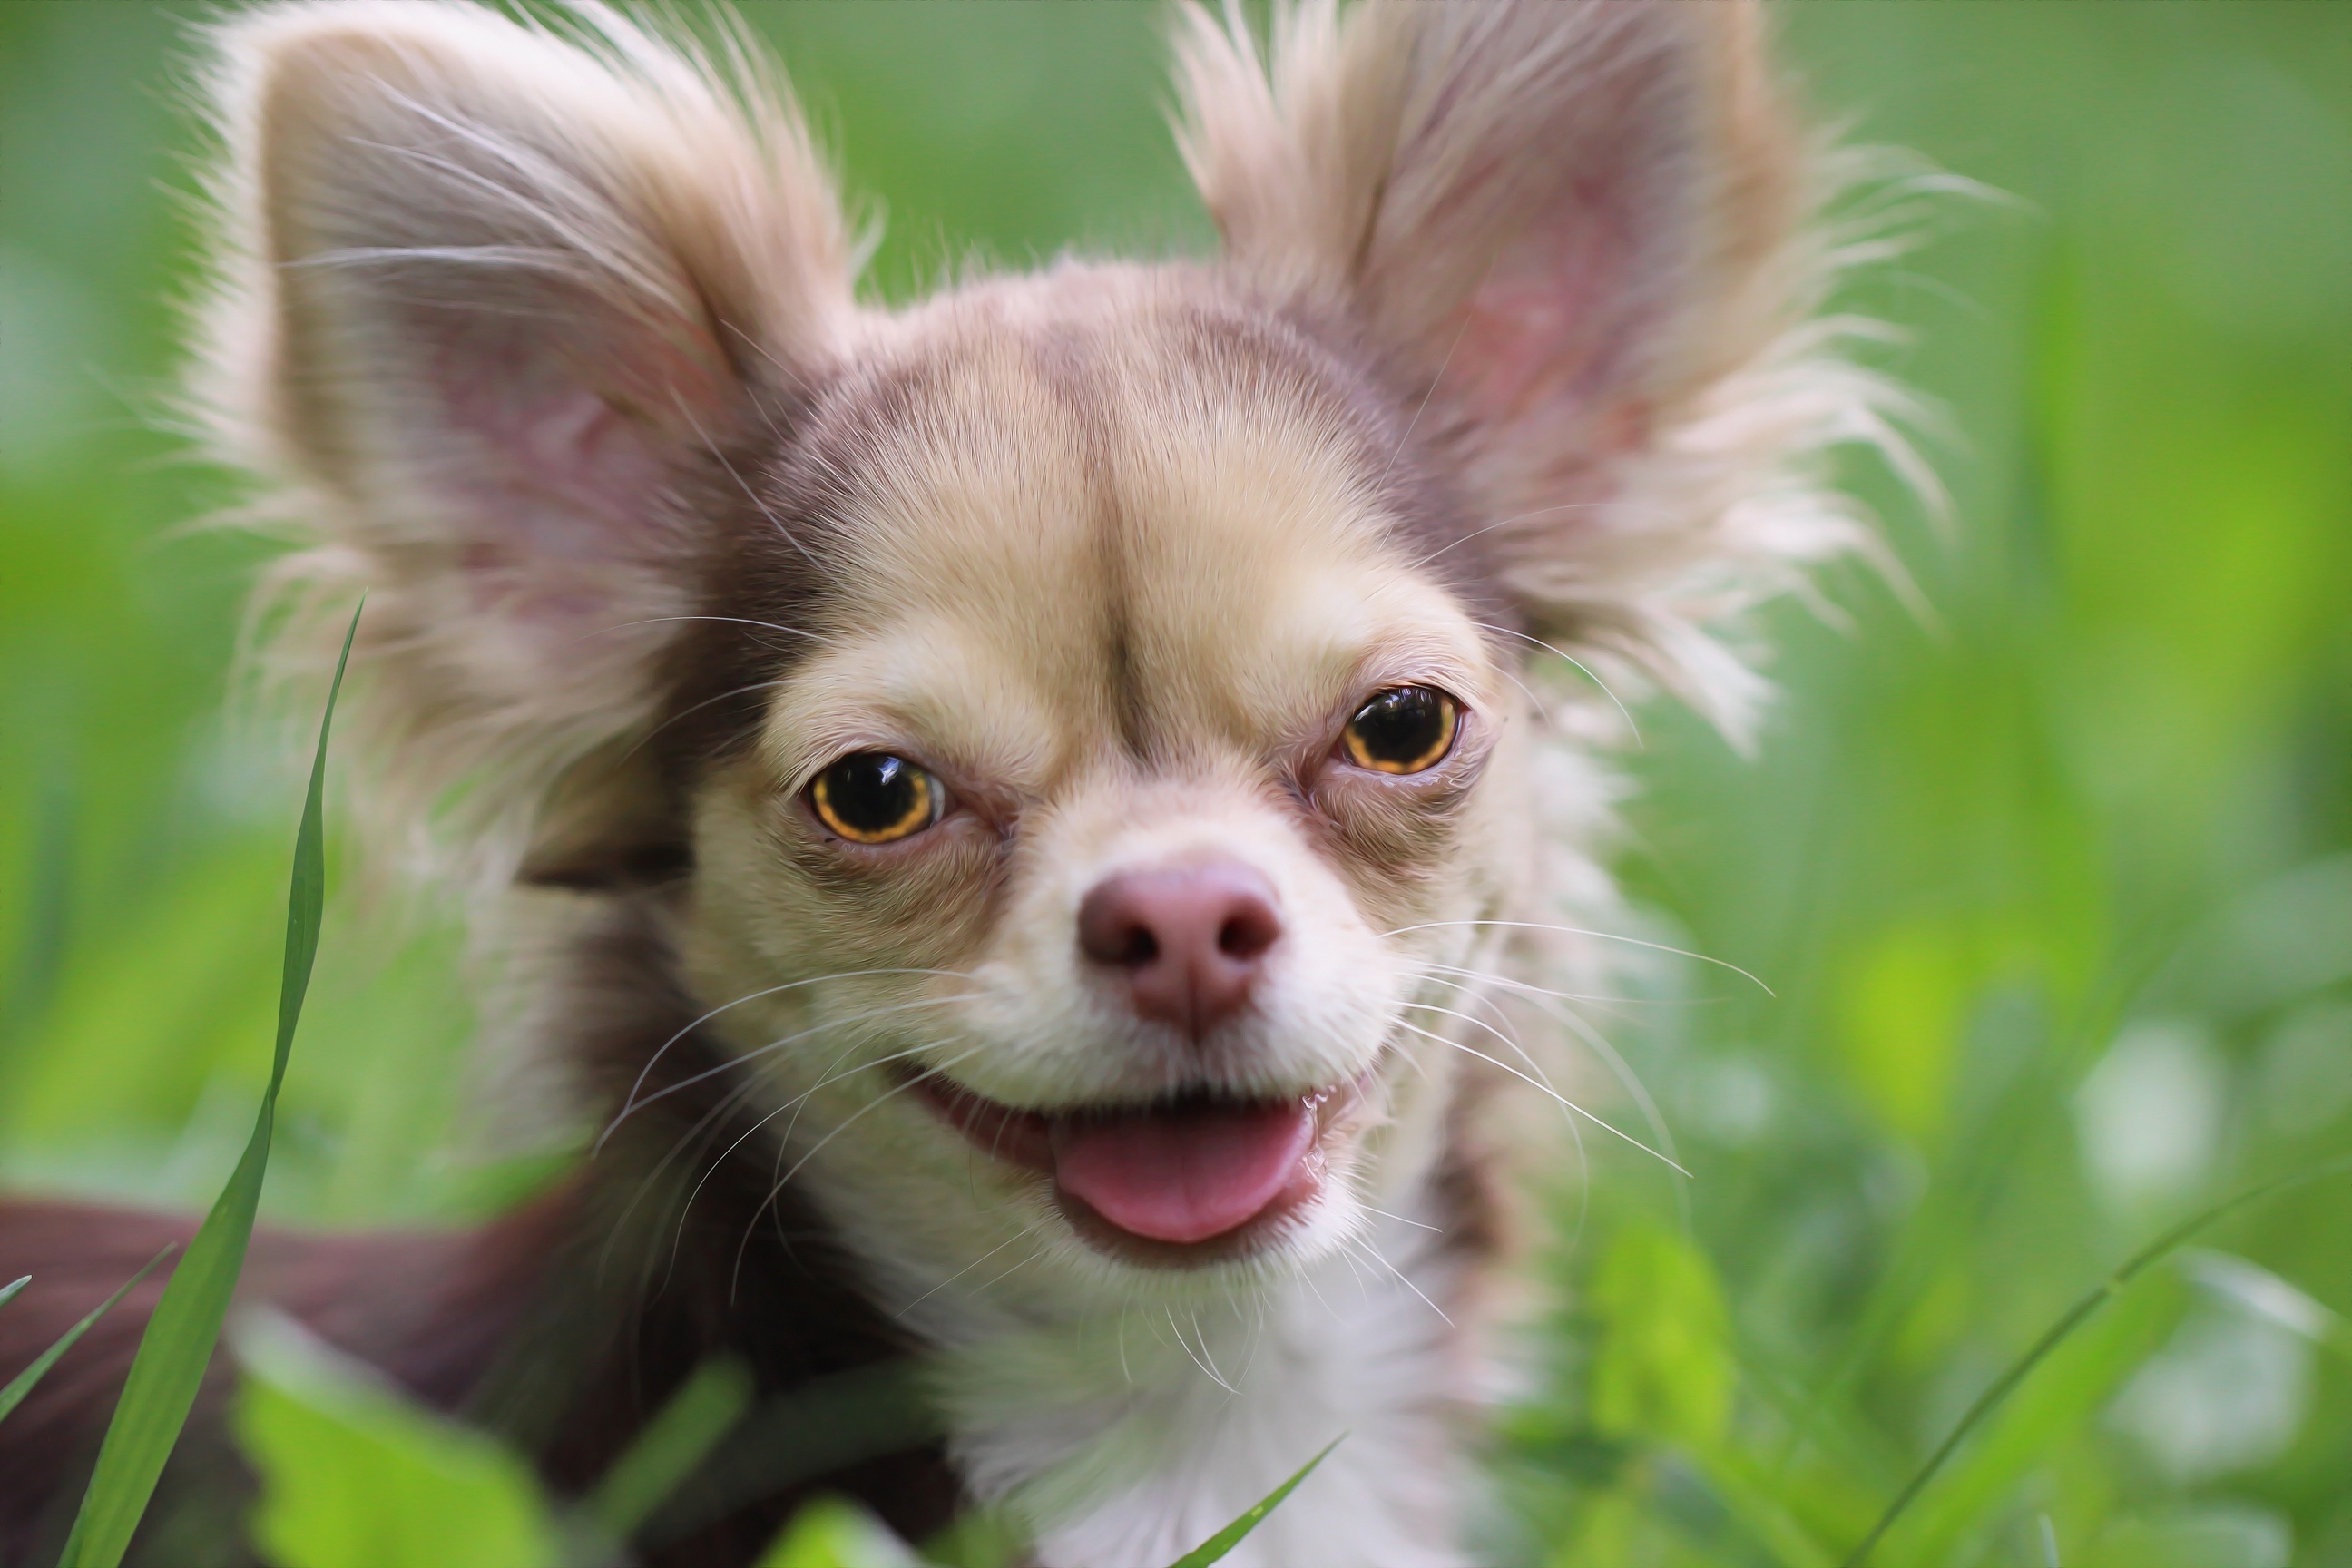 Chihuahua HD wallpaper, High-quality image, Clear and vibrant, Cute dog, 2600x1730 HD Desktop